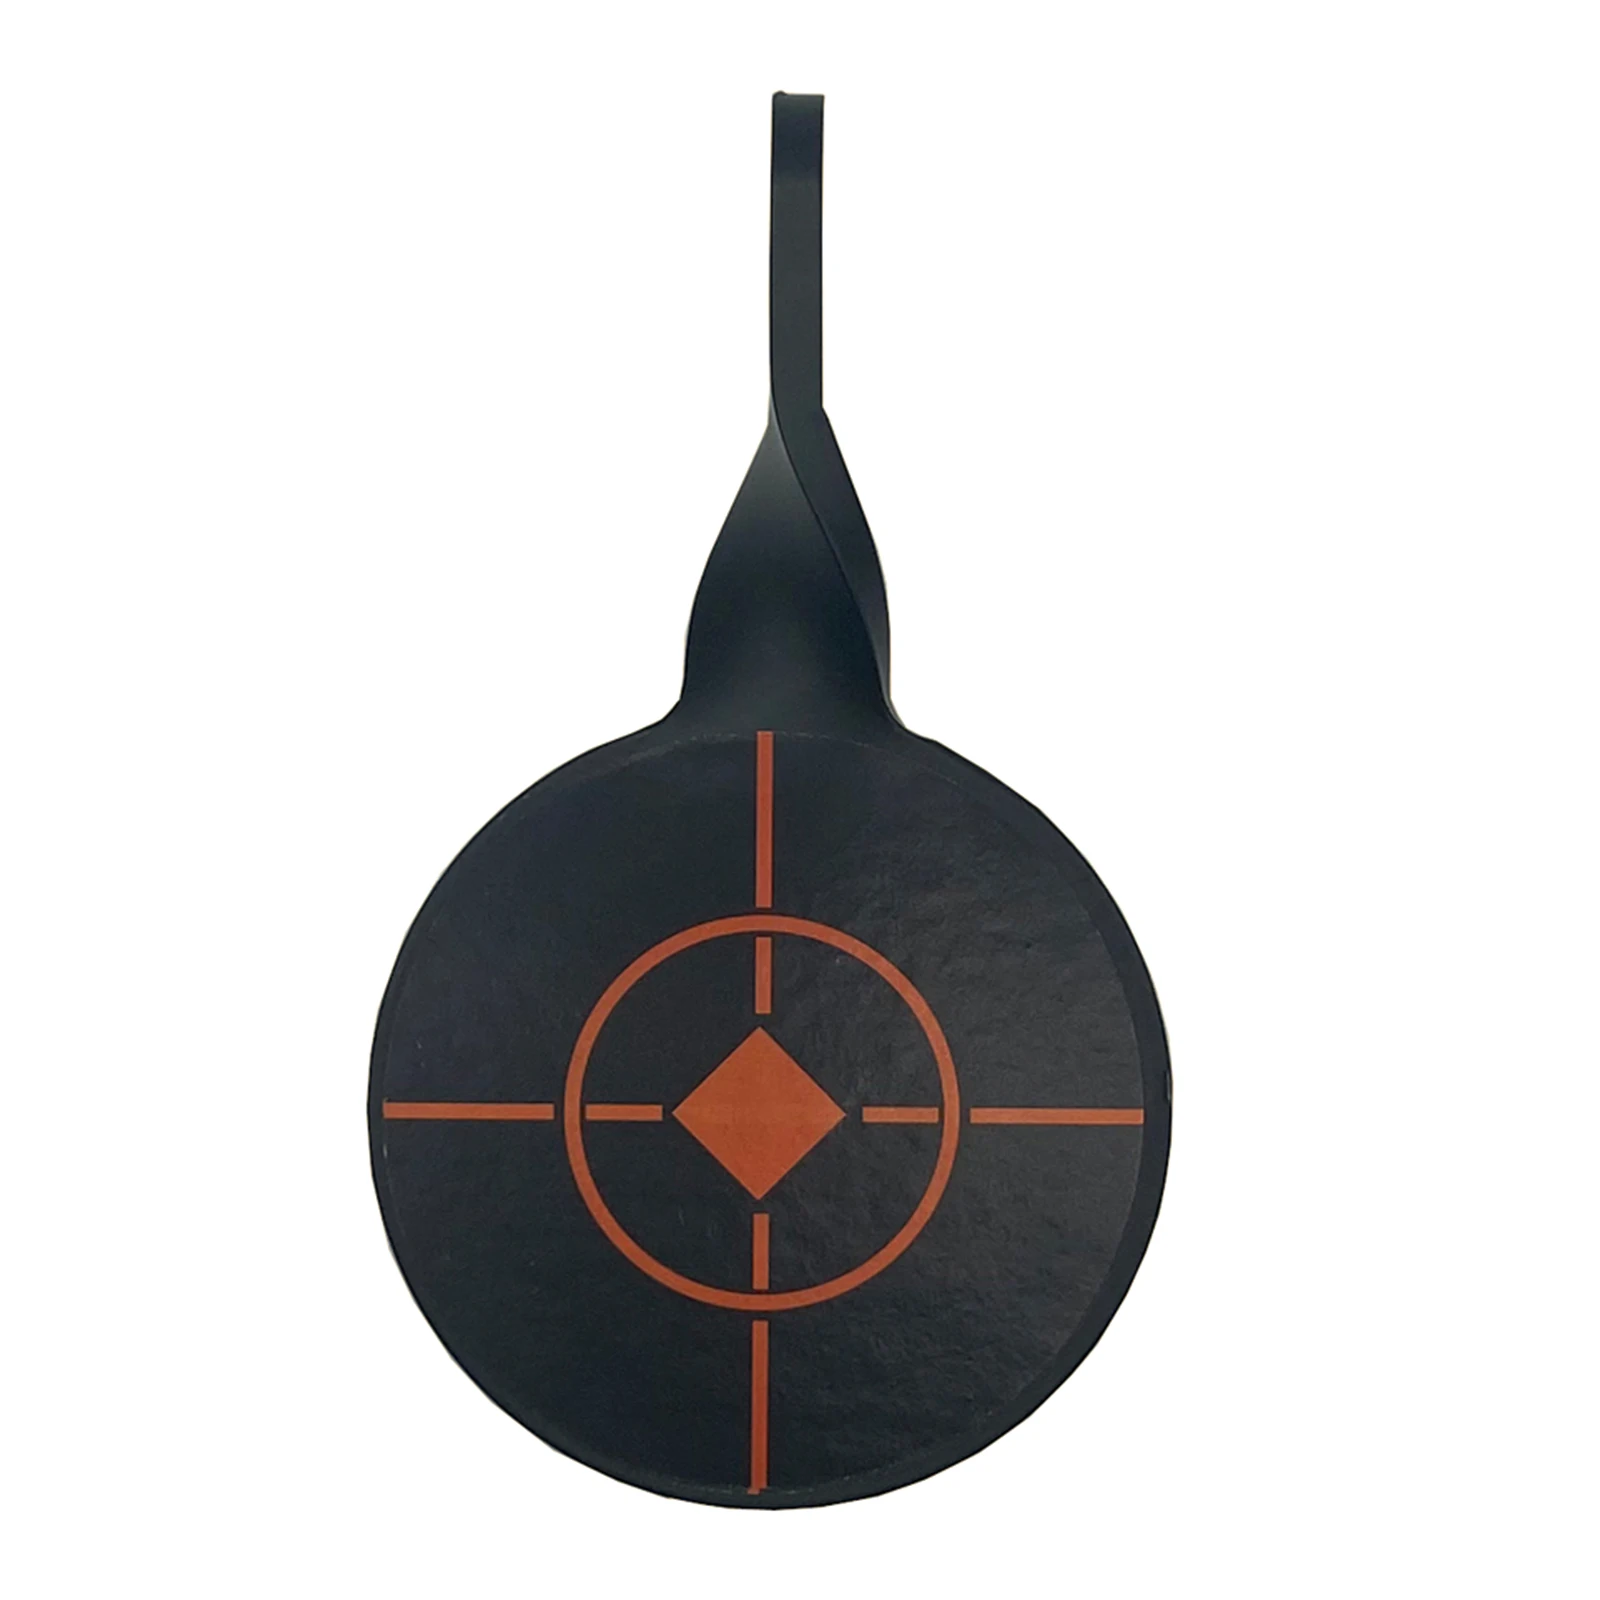 Diameter 8cm Shooting Target Stainless Steel Targets Hunting Catapult Paintball Archery Bow Training Target Hunting Accessories